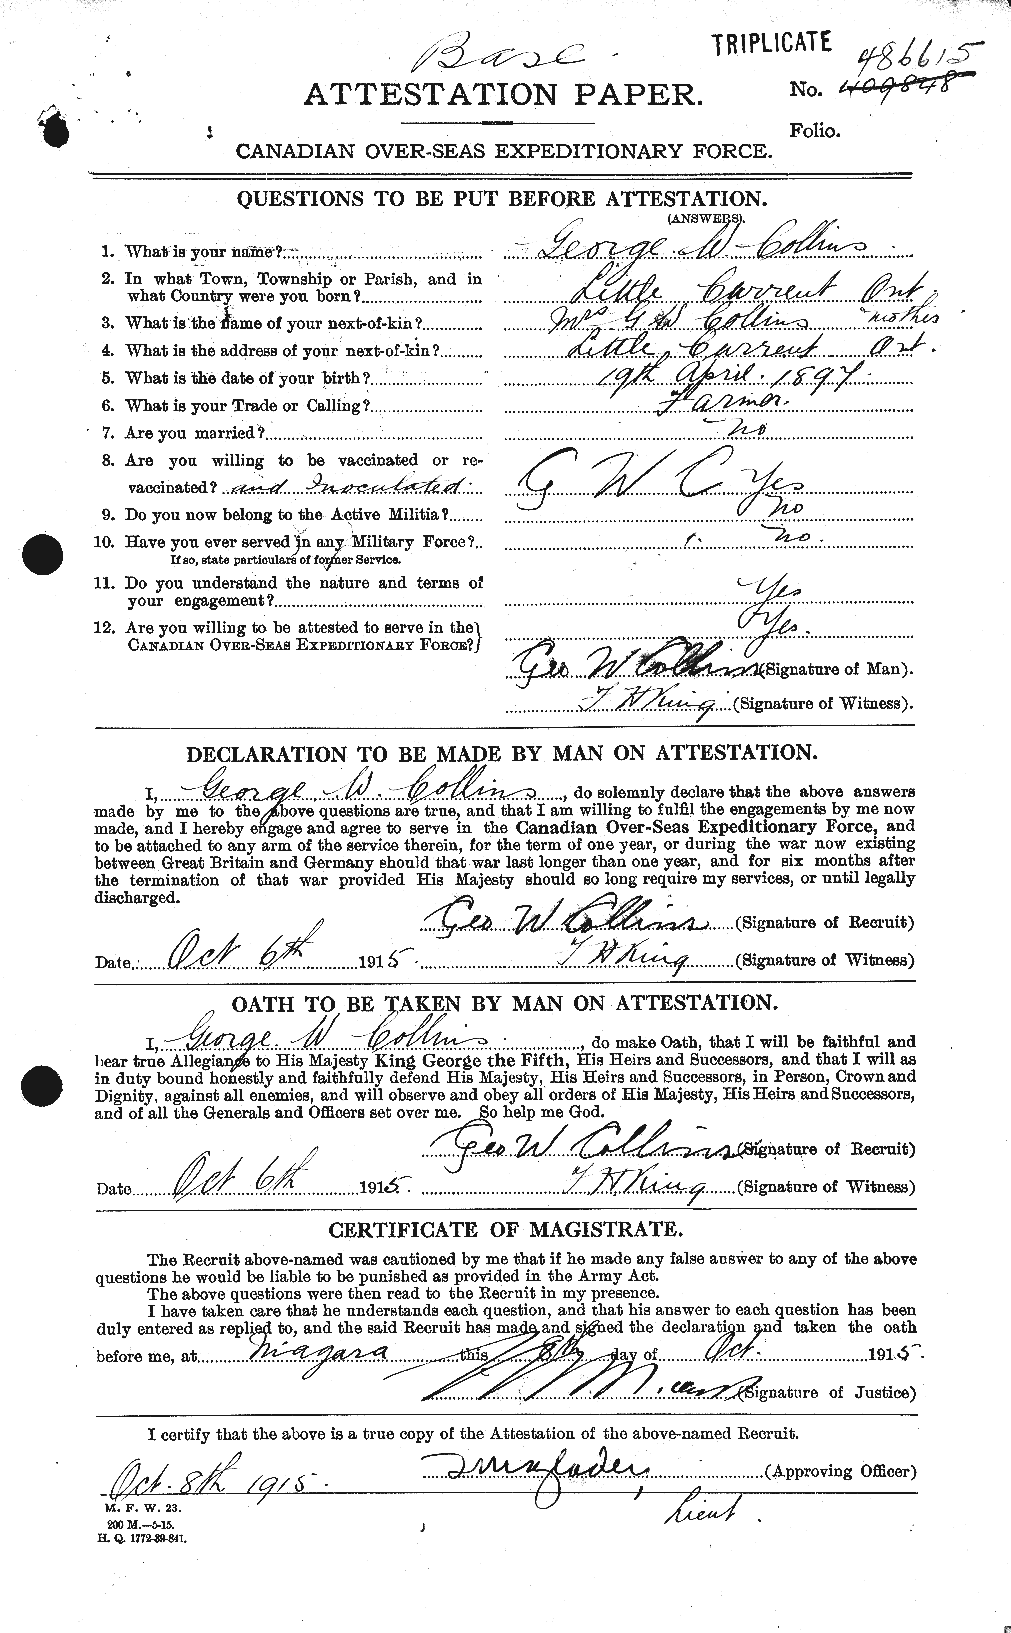 Personnel Records of the First World War - CEF 070528a